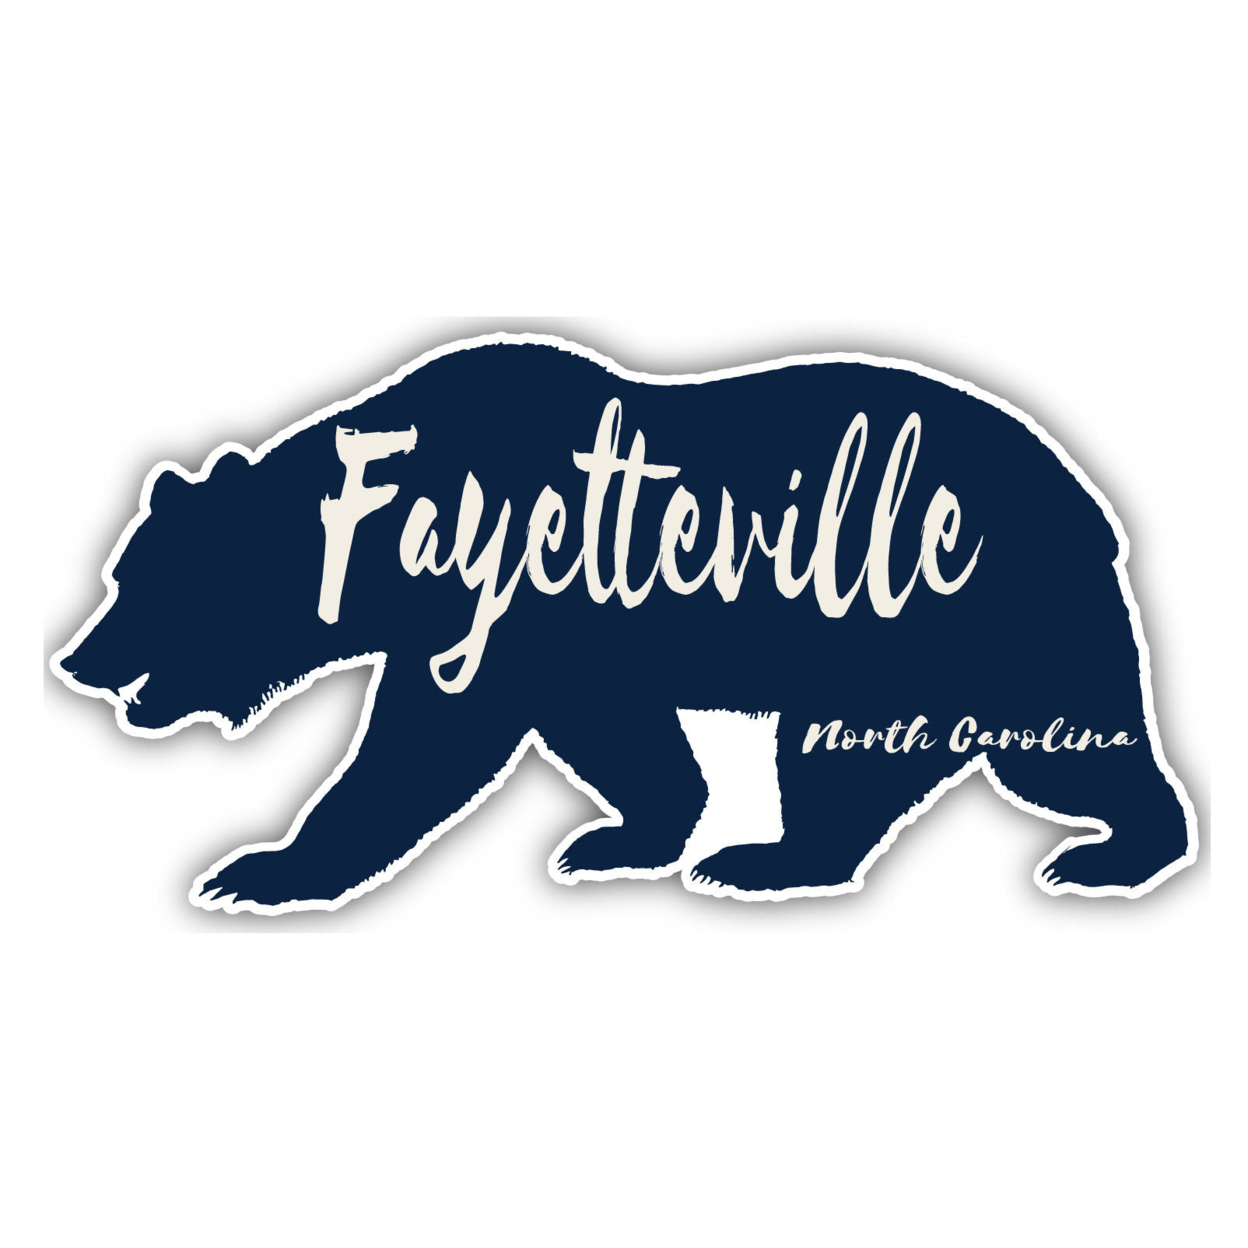 Fayetteville North Carolina Souvenir Decorative Stickers (Choose Theme And Size) - 4-Pack, 10-Inch, Bear